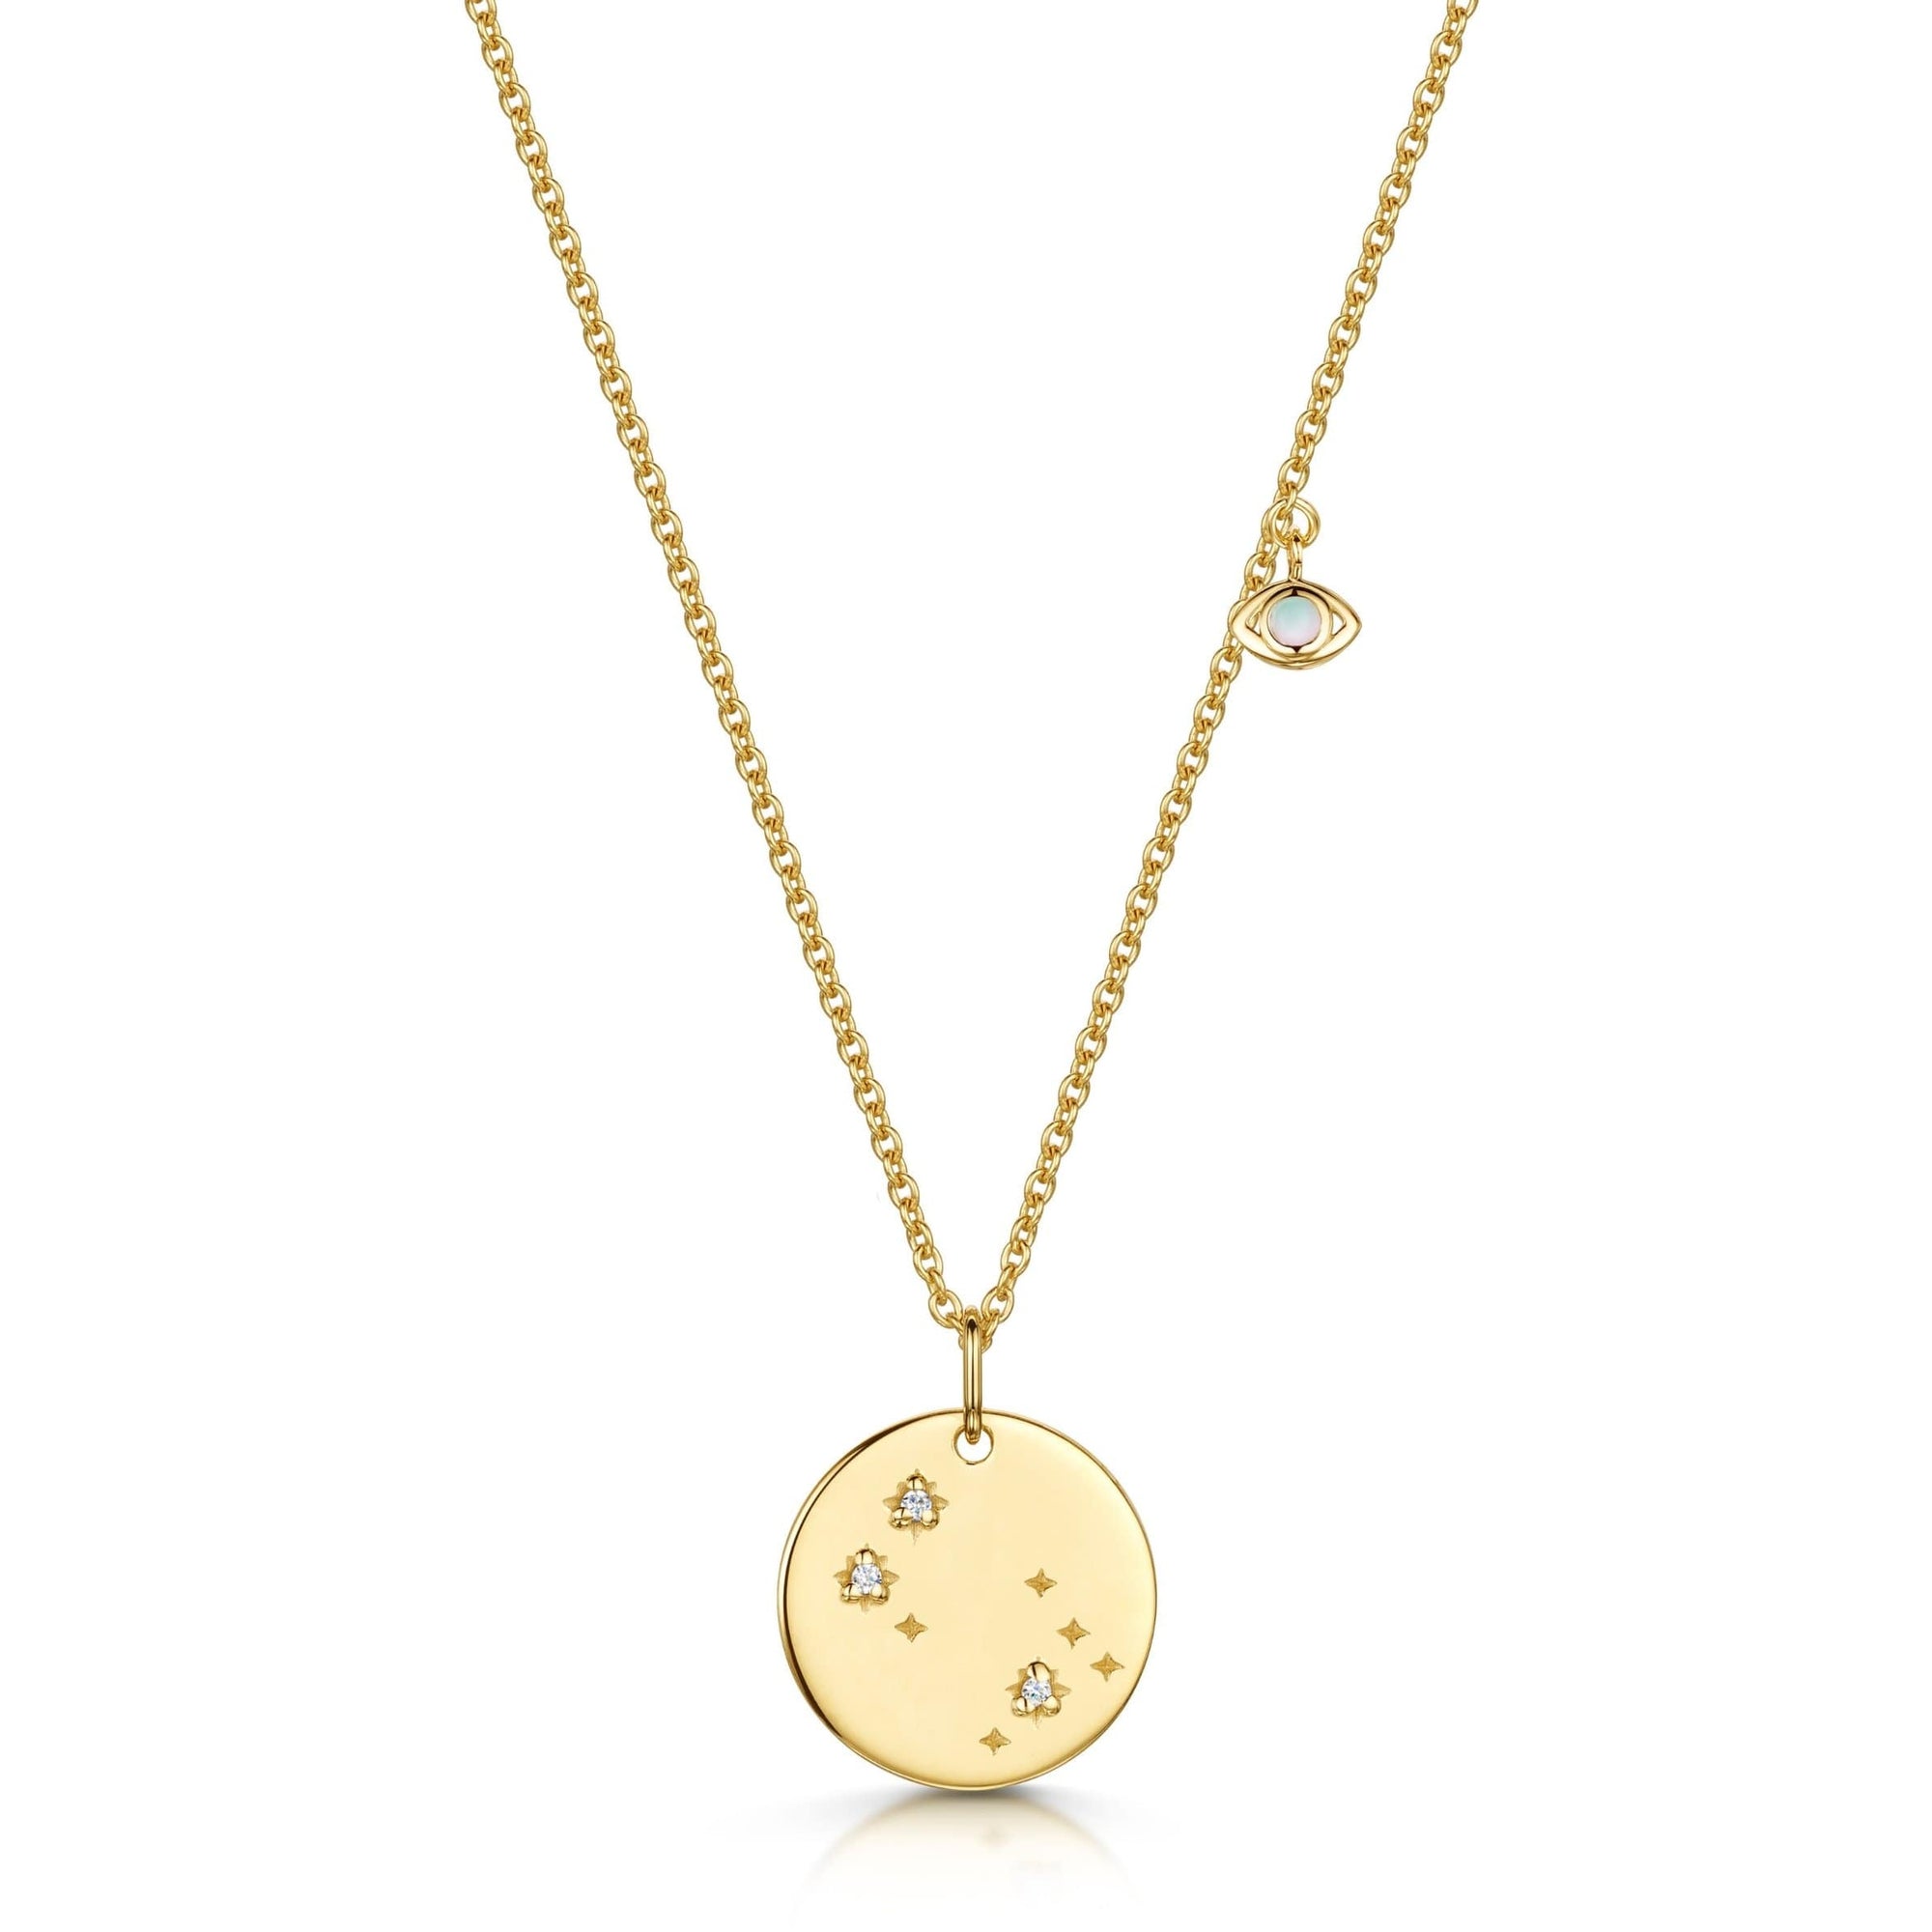 Fervor Montreal Necklace Gemini Double-Sided Zodiac & Constellation Necklace